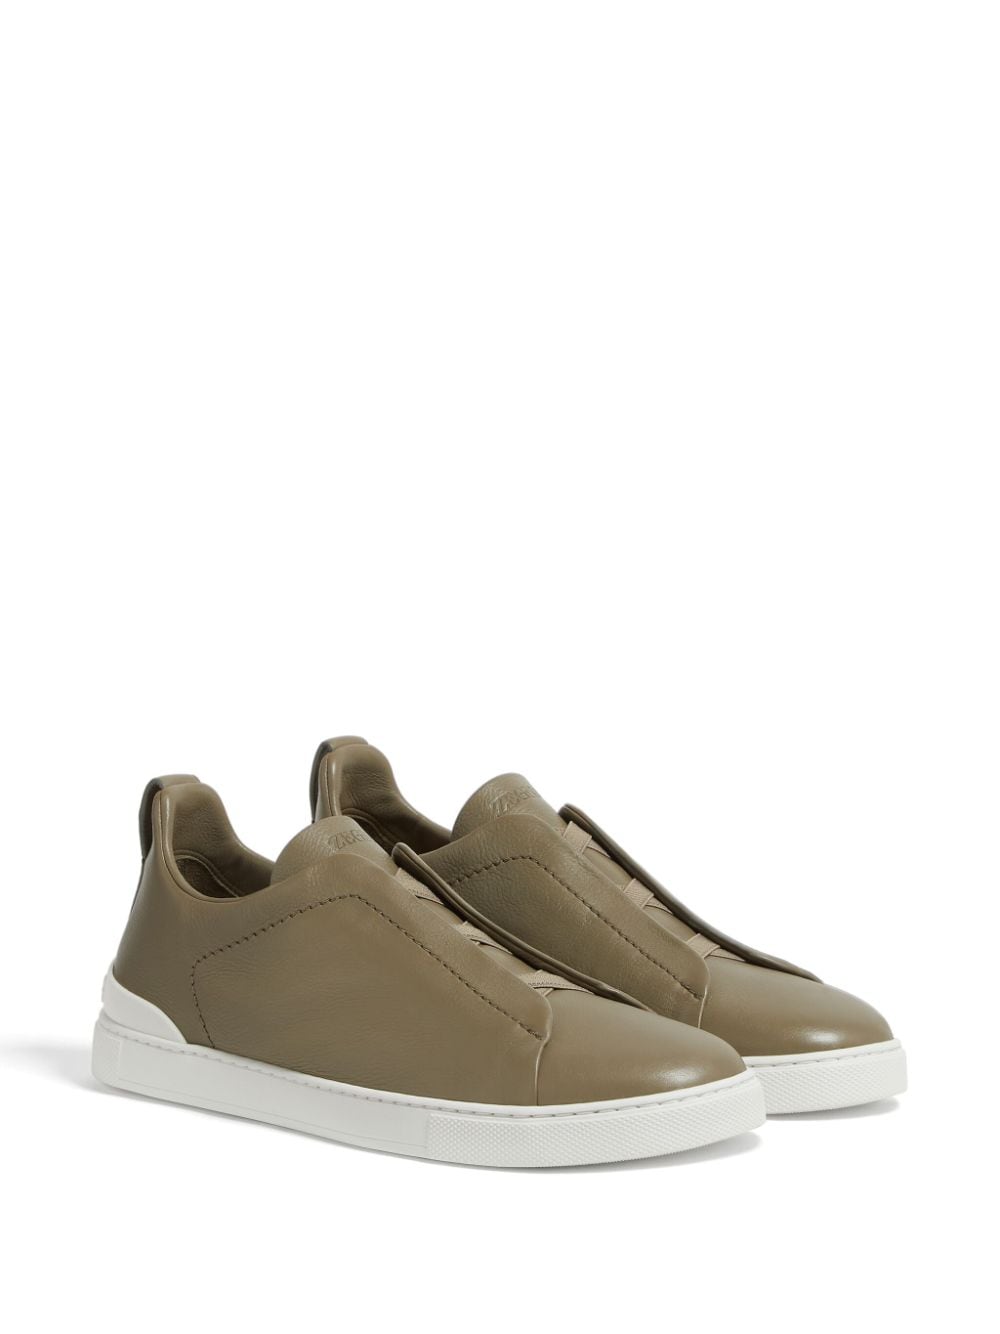 Image 2 of Zegna Triple Stitch leather sneakers